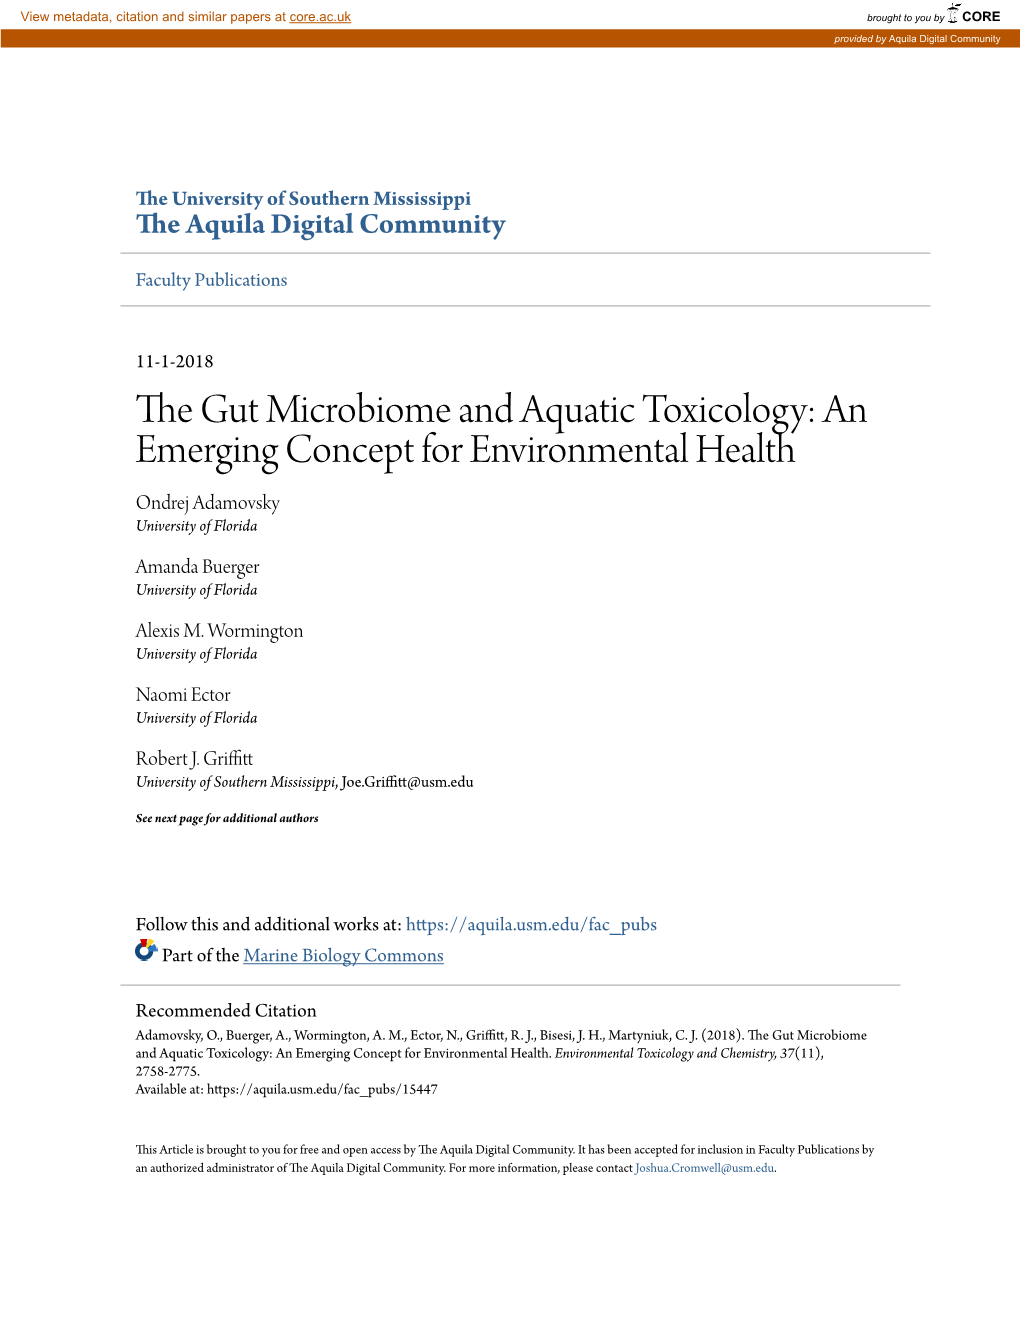 The Gut Microbiome and Aquatic Toxicology: an Emerging Concept For